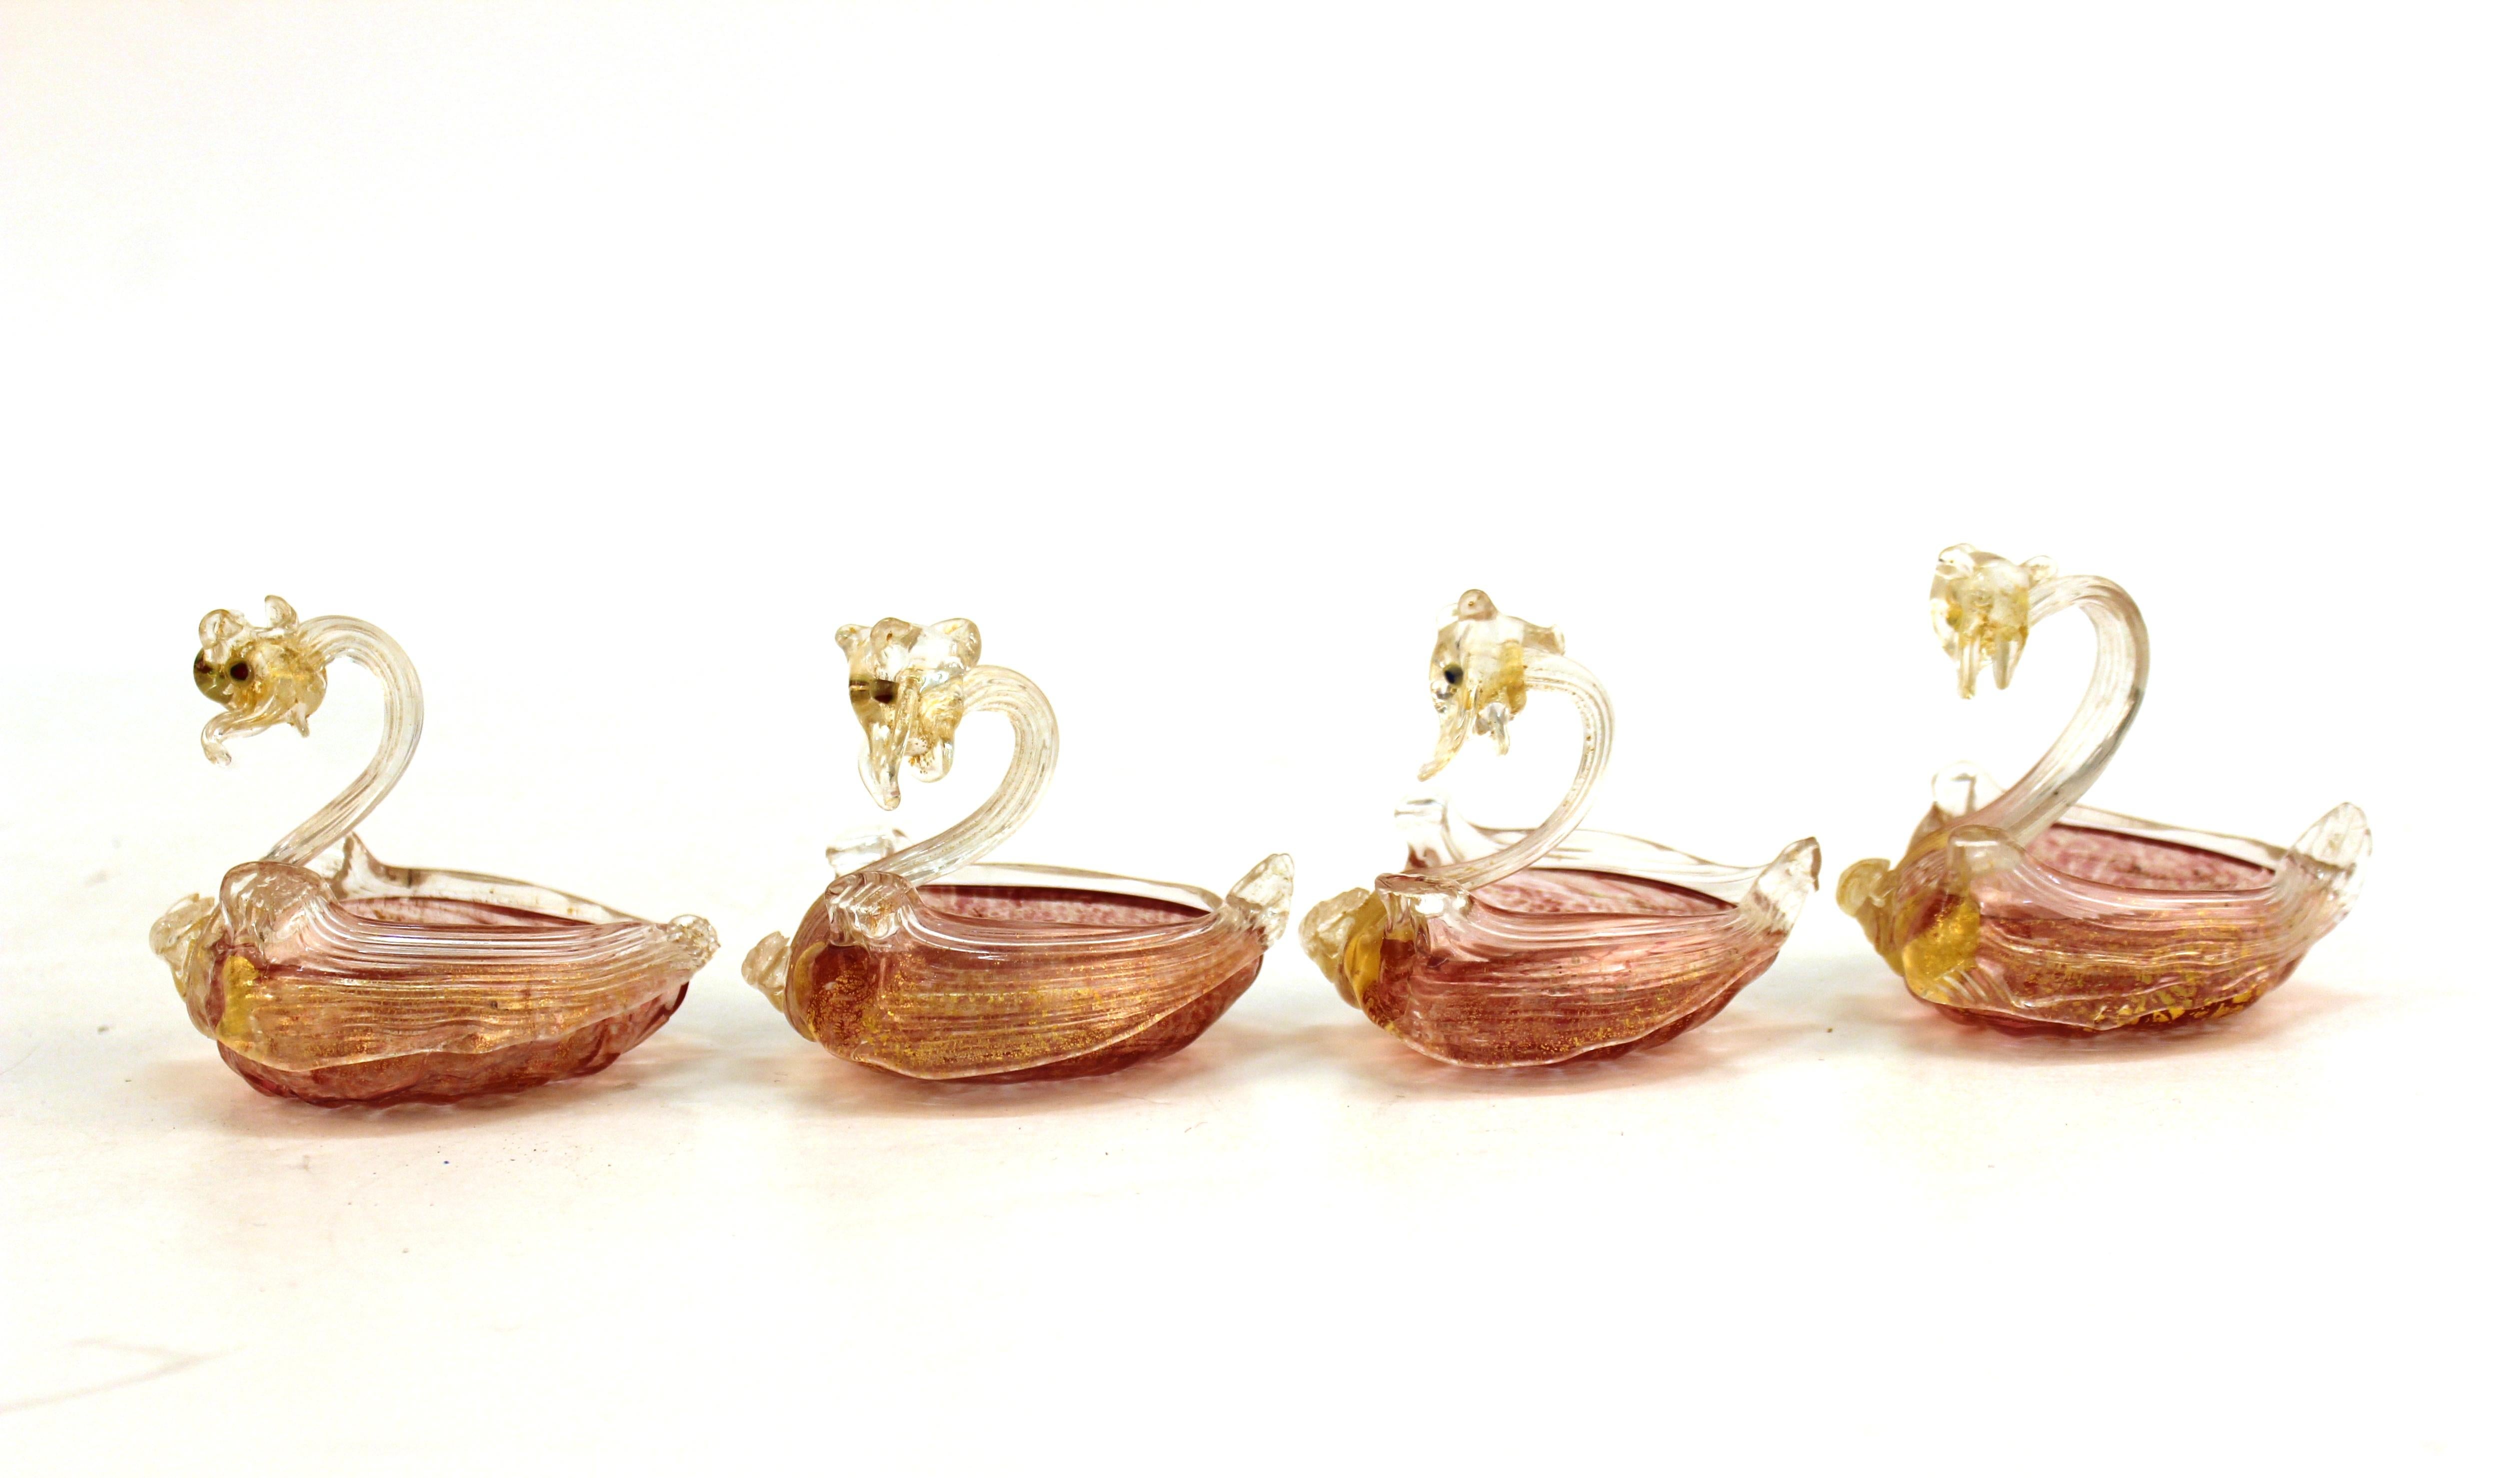 Venetian Murano handblown glass swan-shaped salt cellars attributed to Salviati and made in the 1940s in Italy. The set of four swans have clear and raspberry pink bodies accented with gold leaf. One swan with old repaired breaks. In good vintage